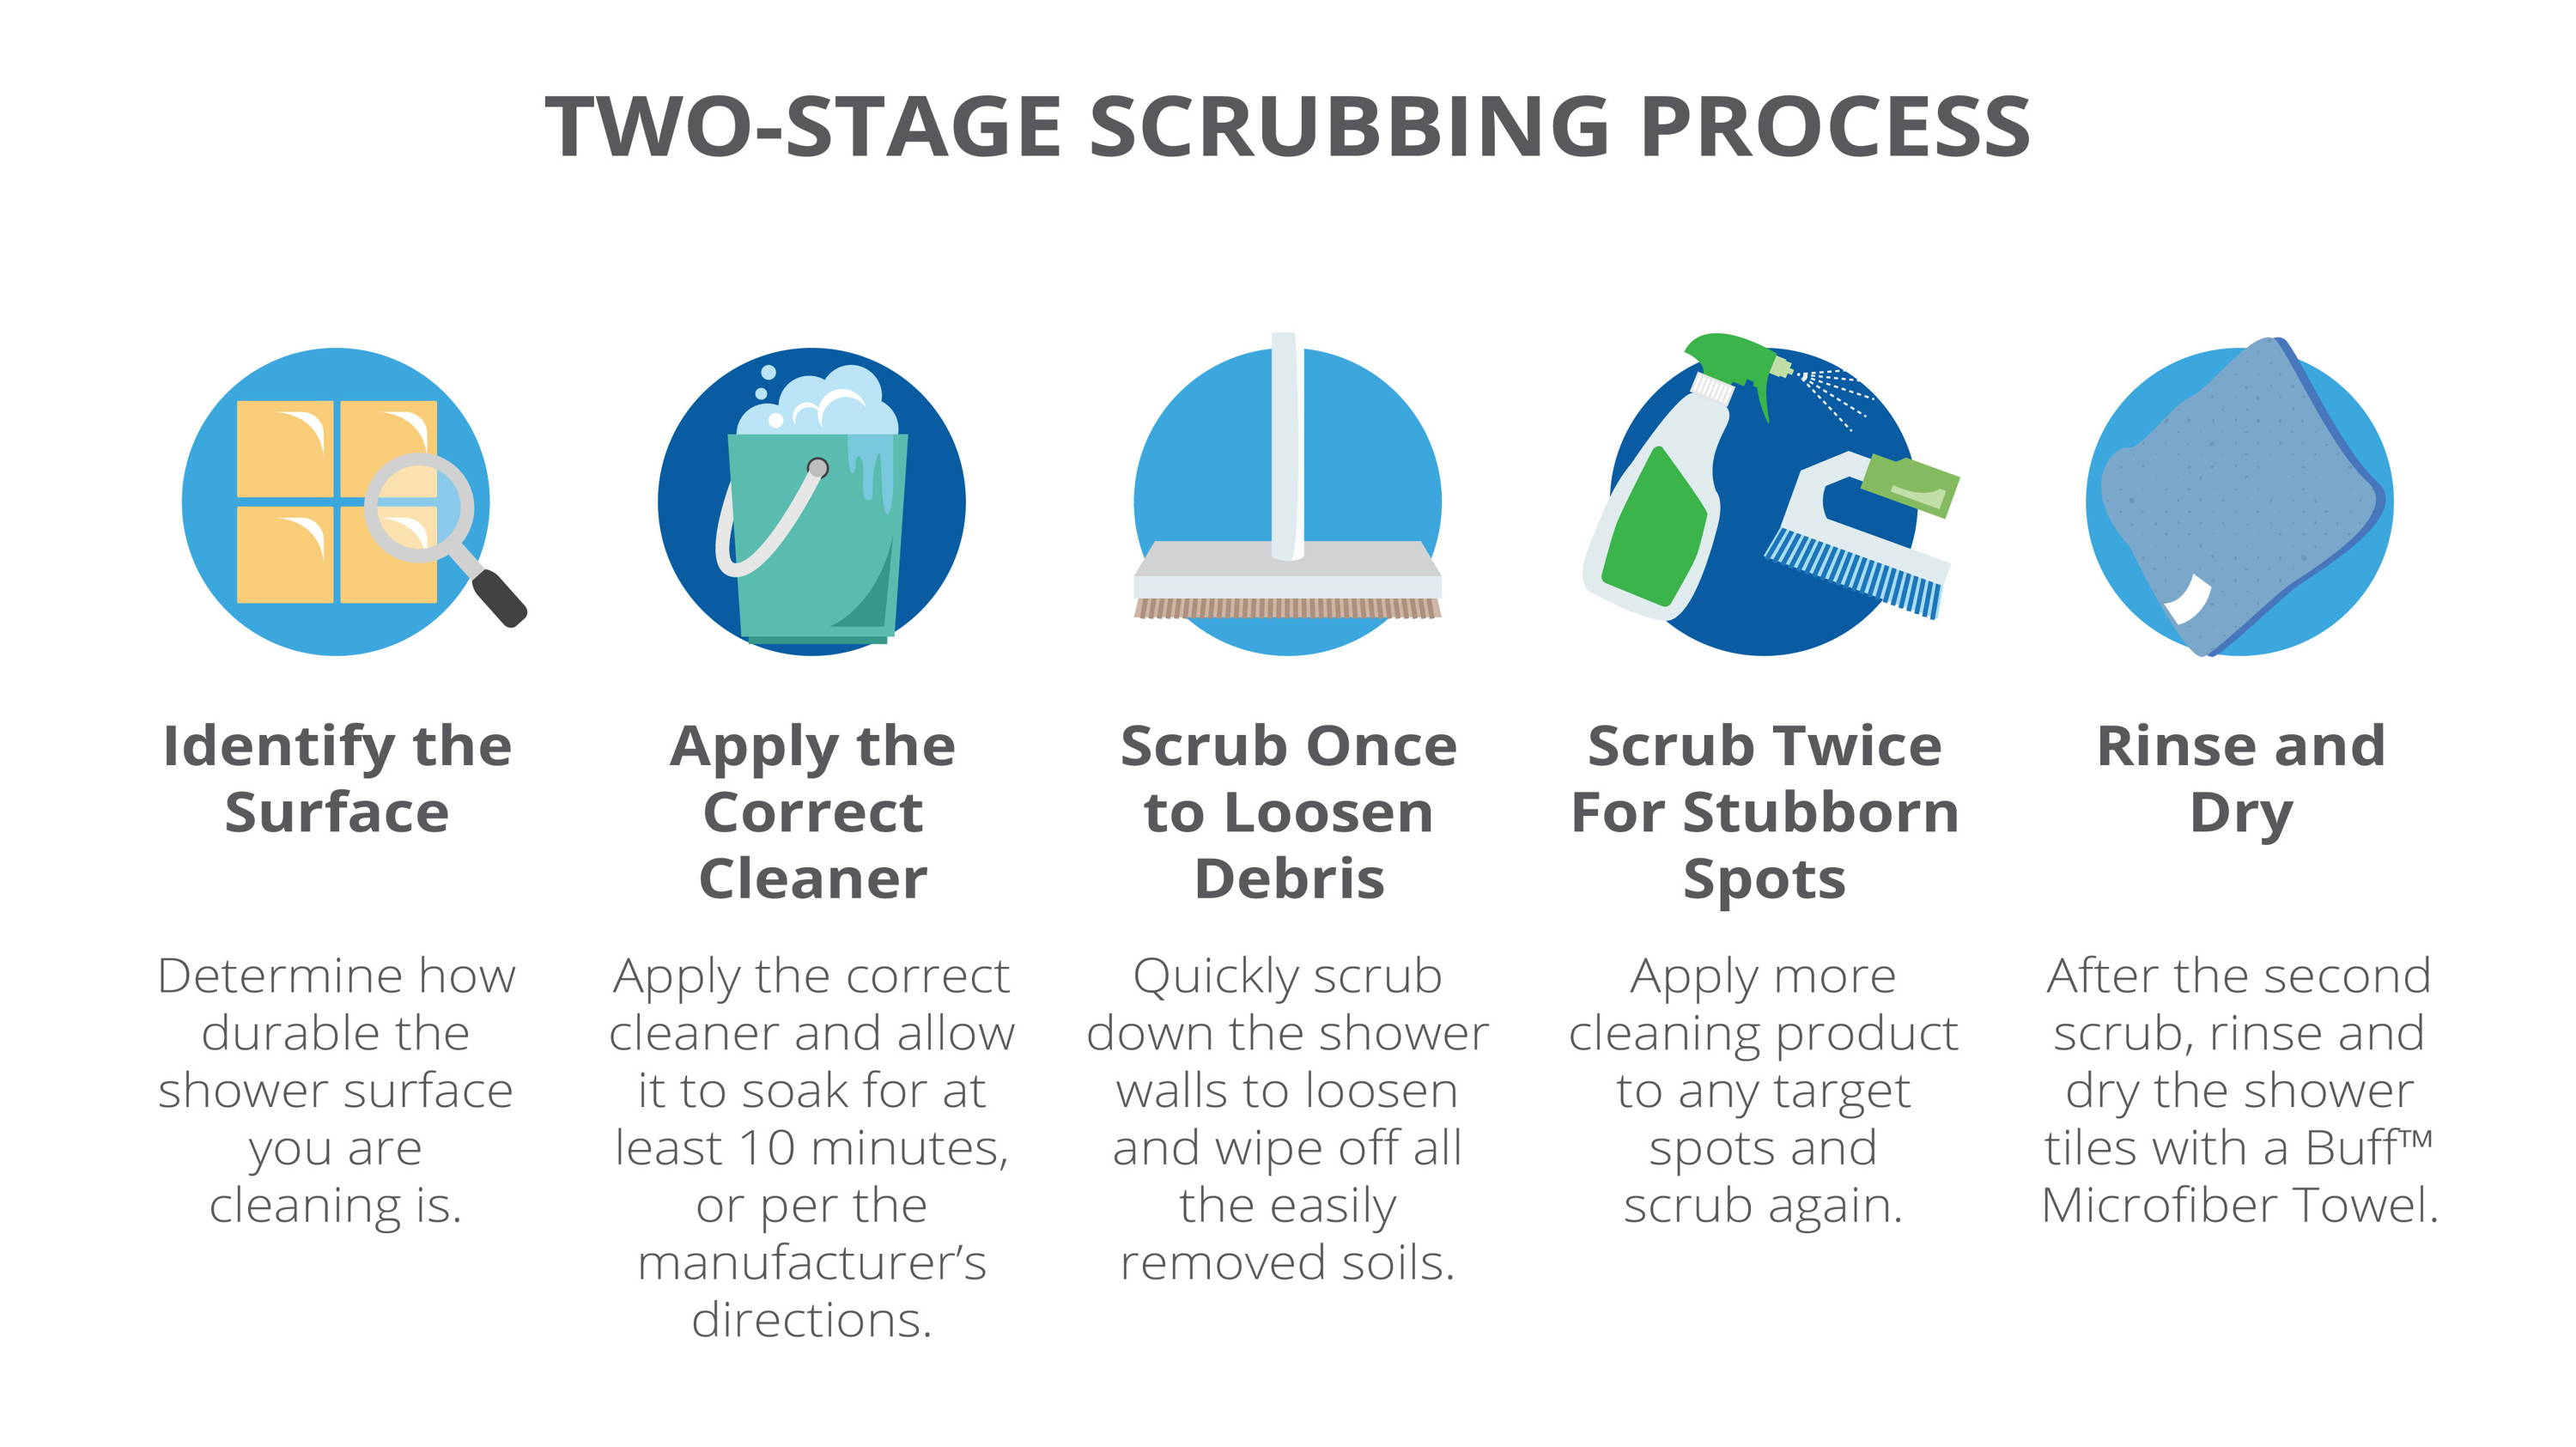 An infographic on the two-stage scrubbing process